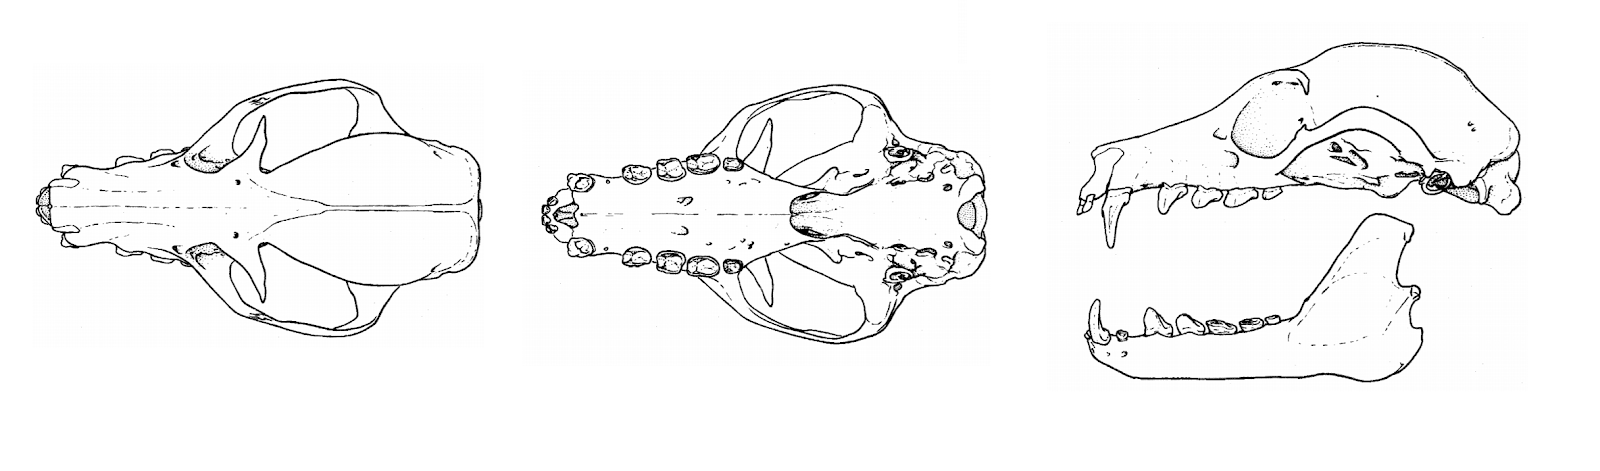 Figure 11. Pteropus vampyrus skull view from top, bottom, and side (from left to right). Image adapted from Kunz and Jones (2000)